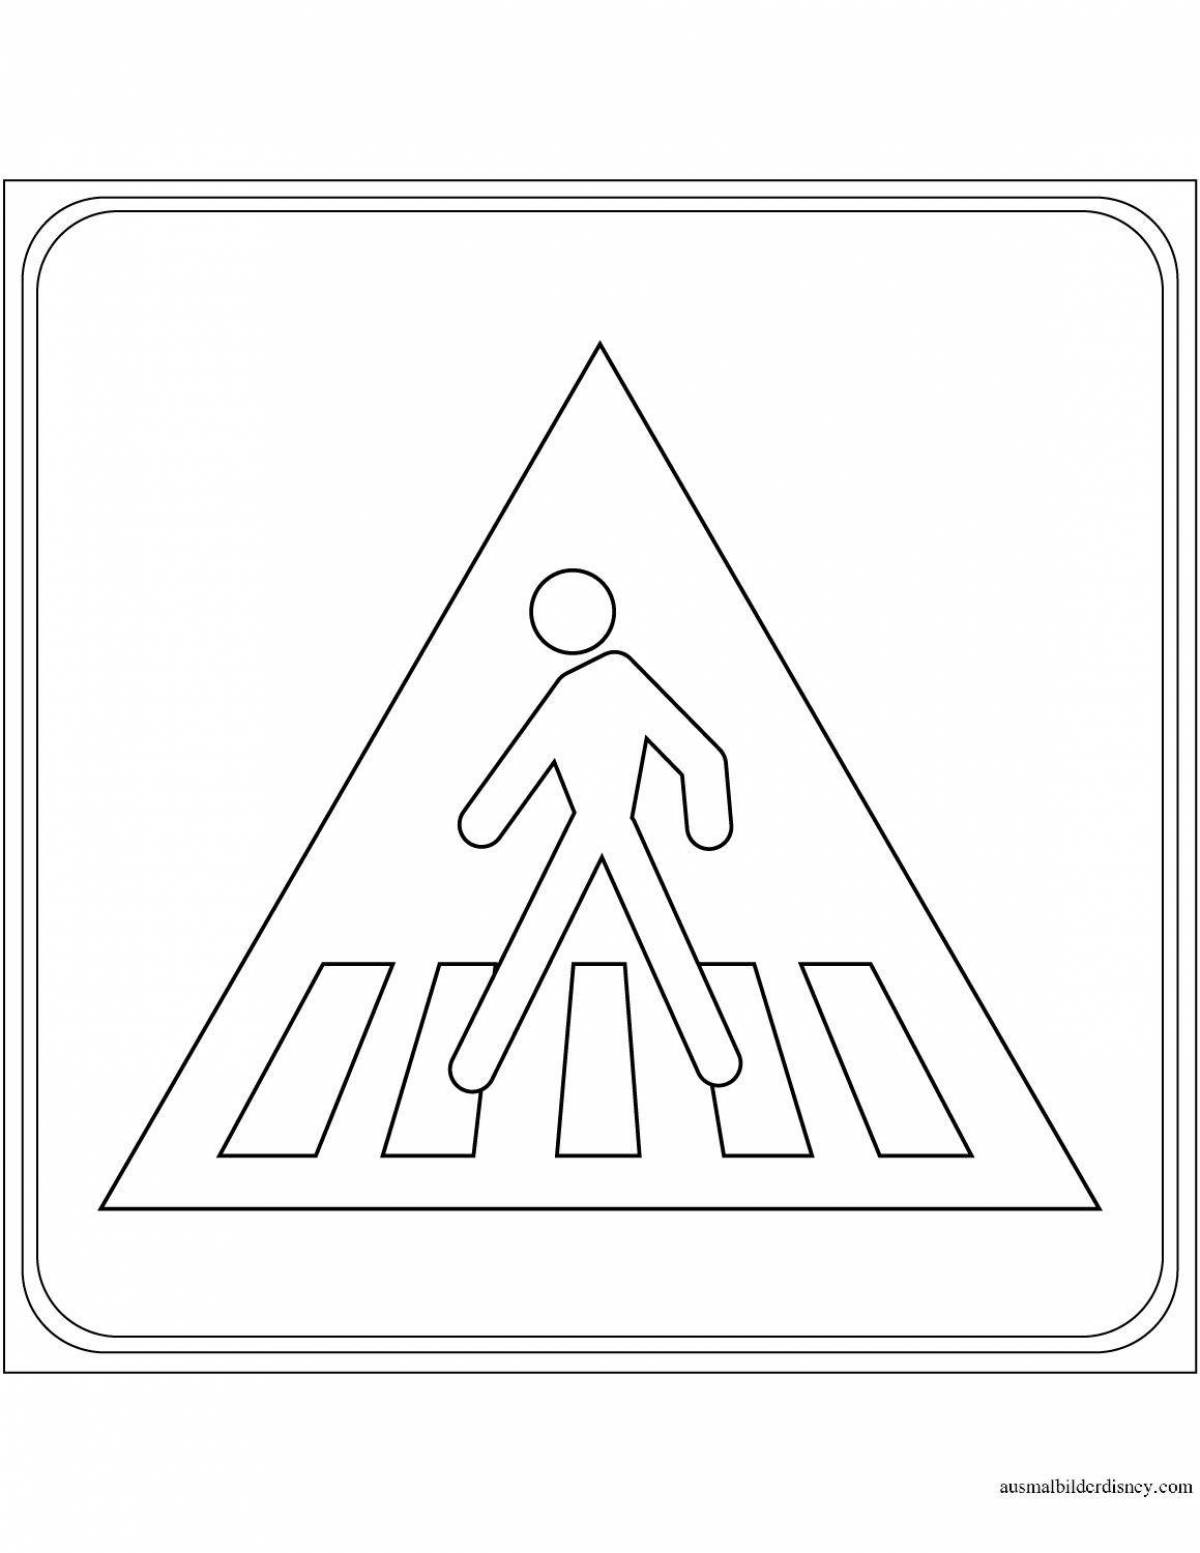 Coloring page cheerful traffic sign grade 2